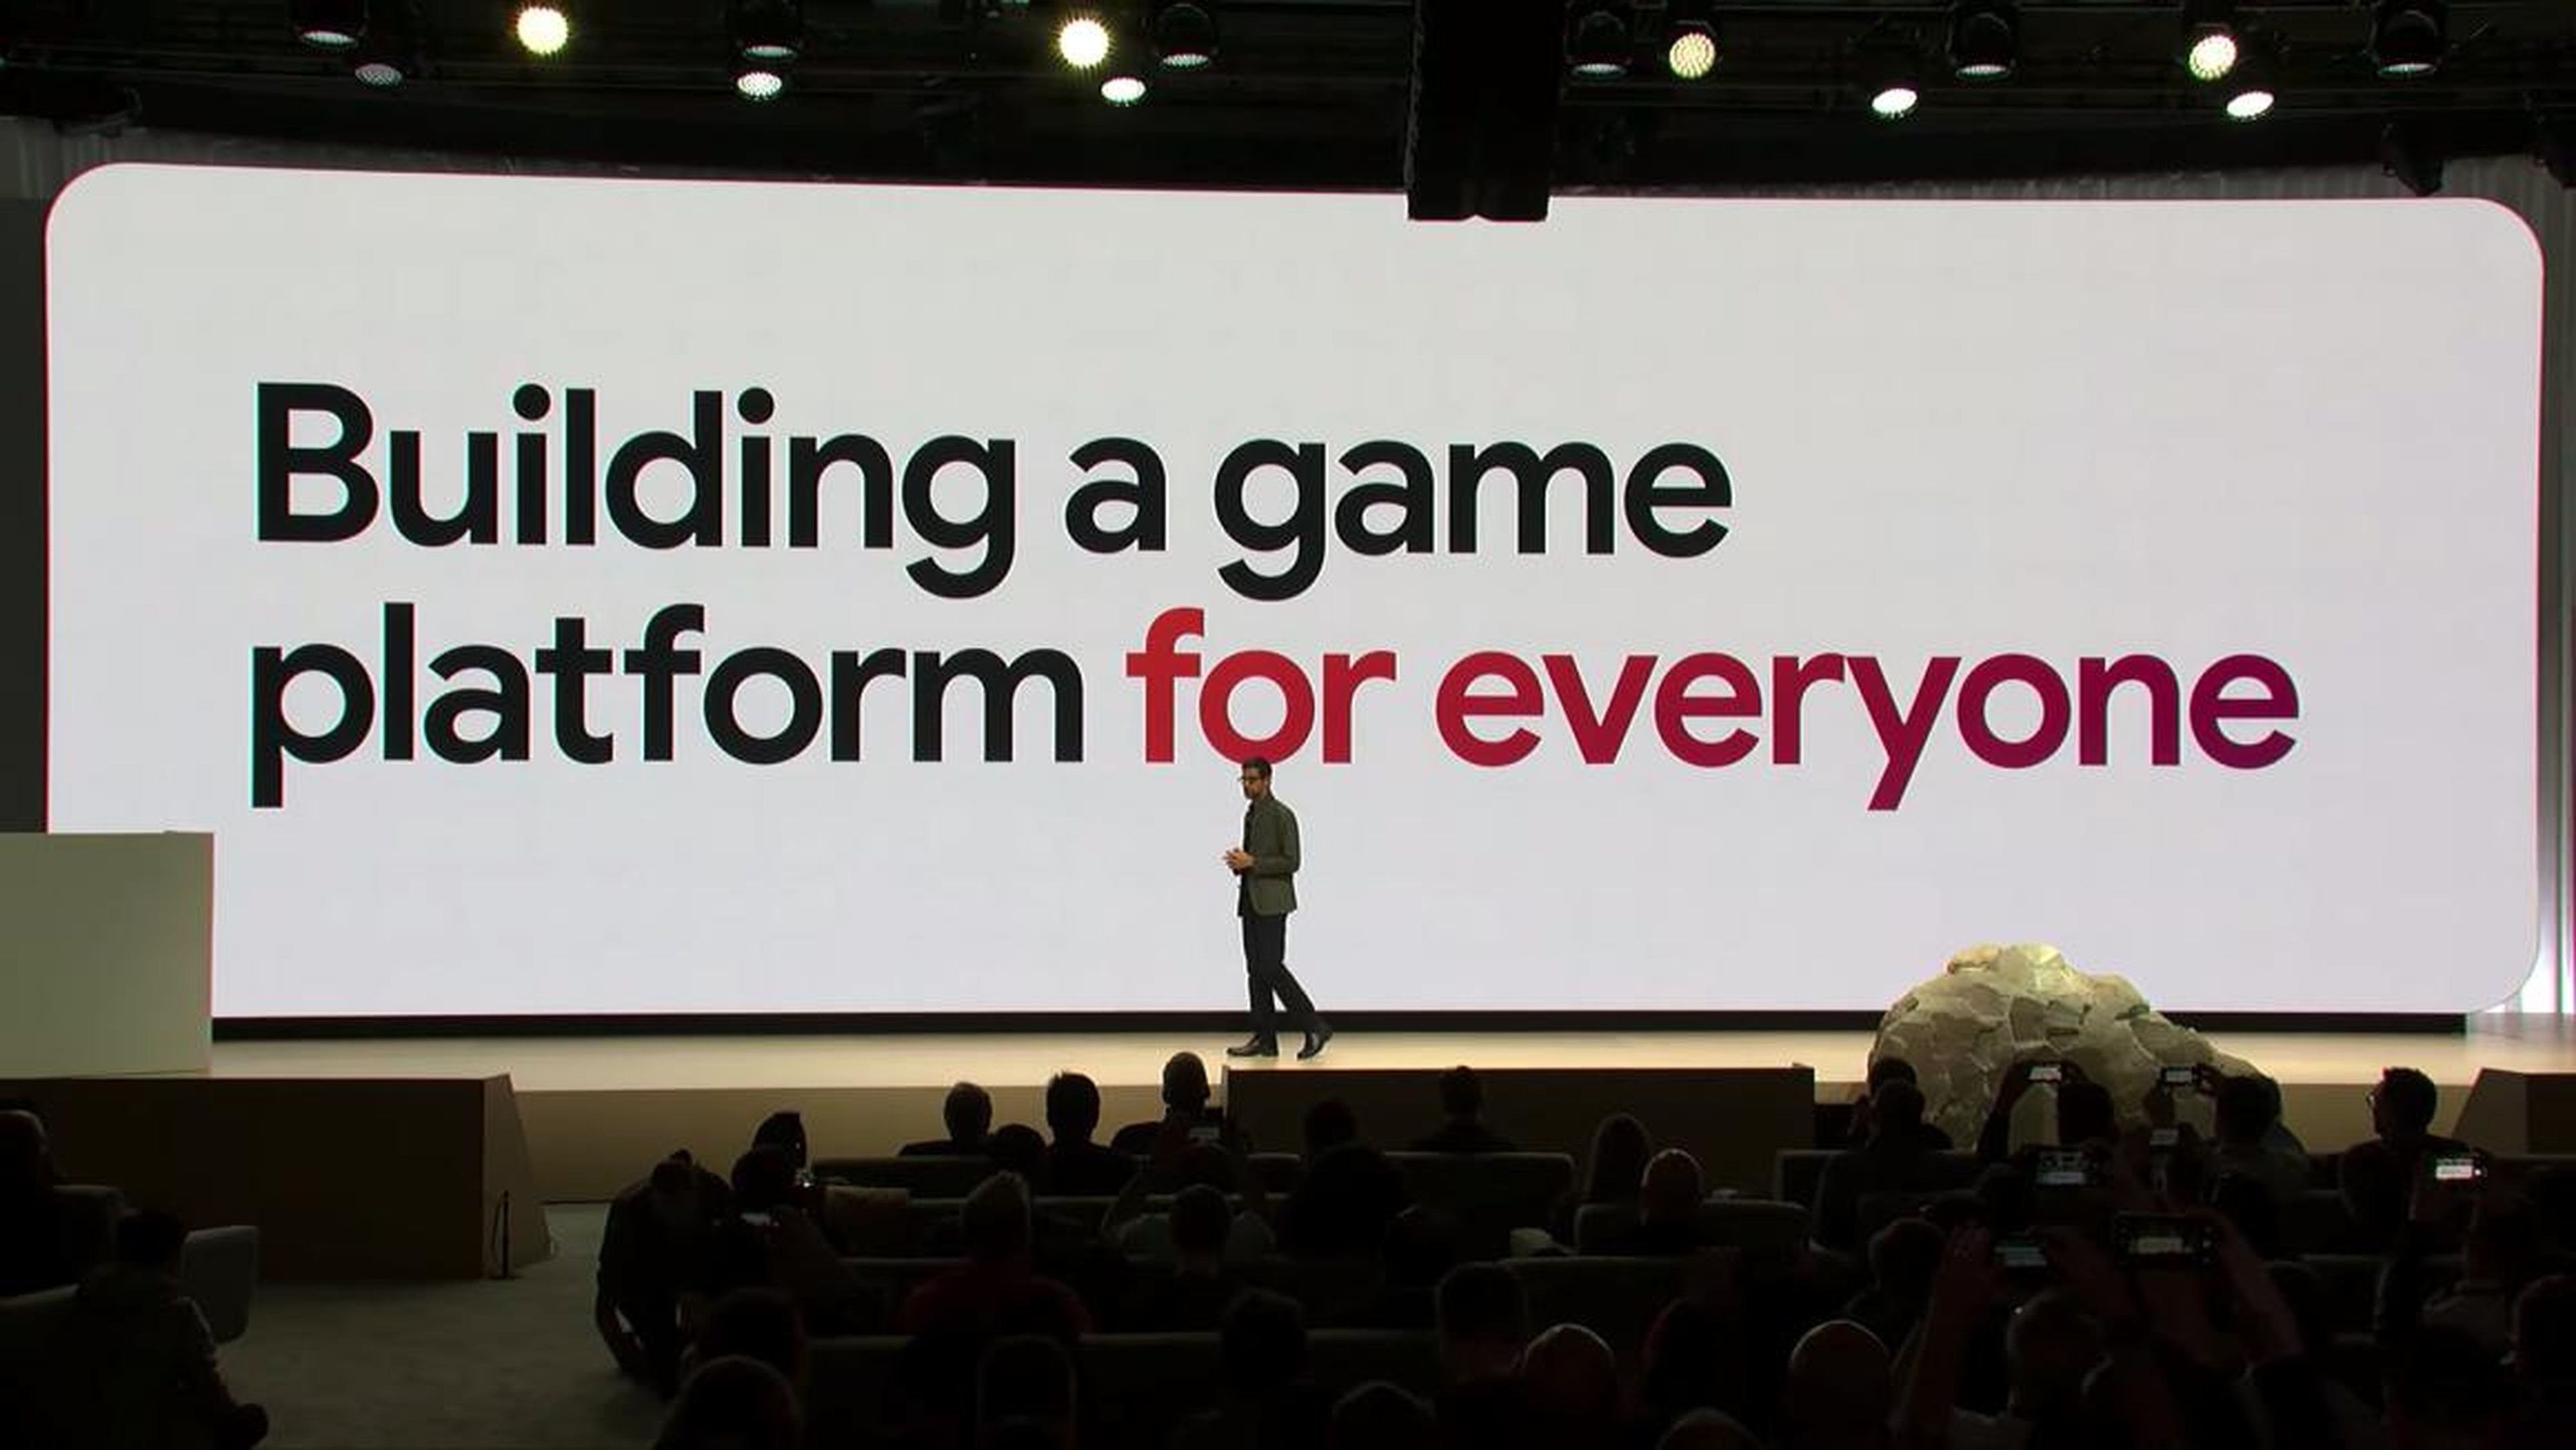 1:09 PM: Google's plan is to build a game platform for everyone. "We're dead serious about making technology accessible to everyone." But he explains that games aren't instantly enjoyable because you need high-end hardware for a